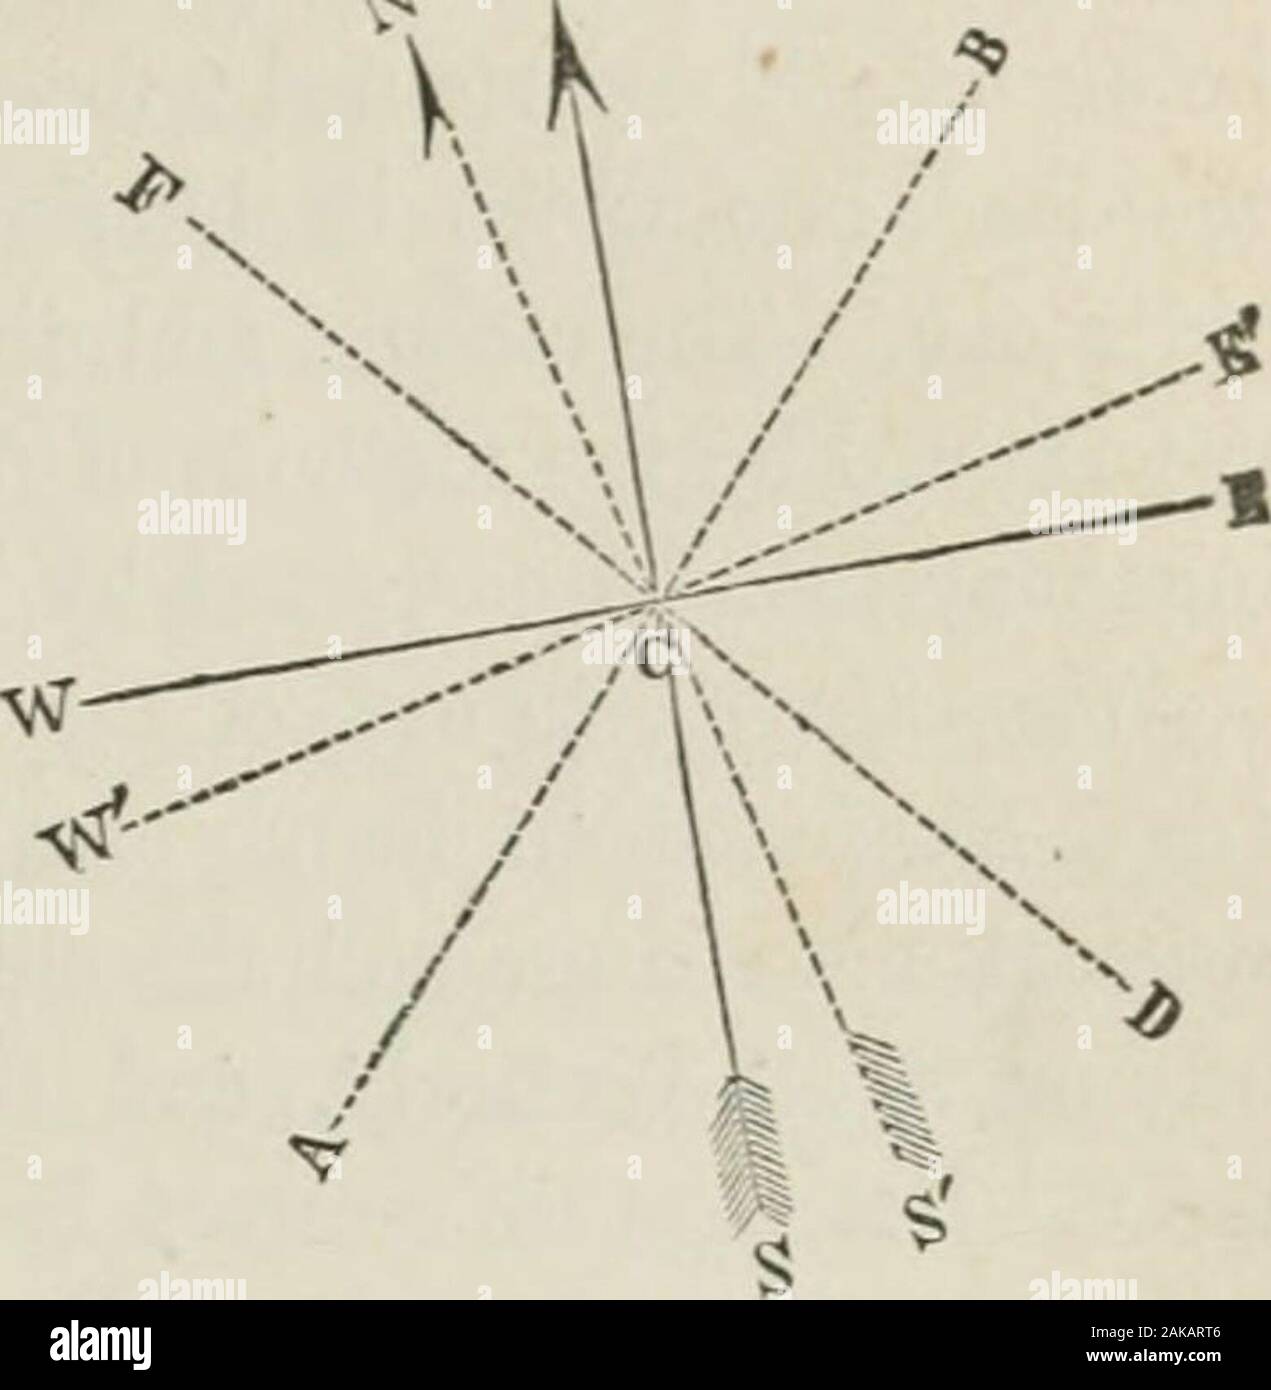 A treatise on land-surveying; comprising the theory developed from five elementary principles; and the practice with the chain alone, the compass, the transit, the theodolite, the plane table, &cIllustrated by four hundred engravings, and a magnetic chart . a circleand BC as a chord of the arc which subtends theirangle. Assuming the chord and arc to coincide(which tliey will, nearly, for small angles) wehave this proportion ; Whole cir( iimference : arcBC :: 360° : BAG : or, 2 X AC X 3.1416 : BC HP• : 360O : BAG, whence BAC =   X 57.3 : or more precisely 57.2P578. DHAP. VIII. j Cbanges in the Stock Photo